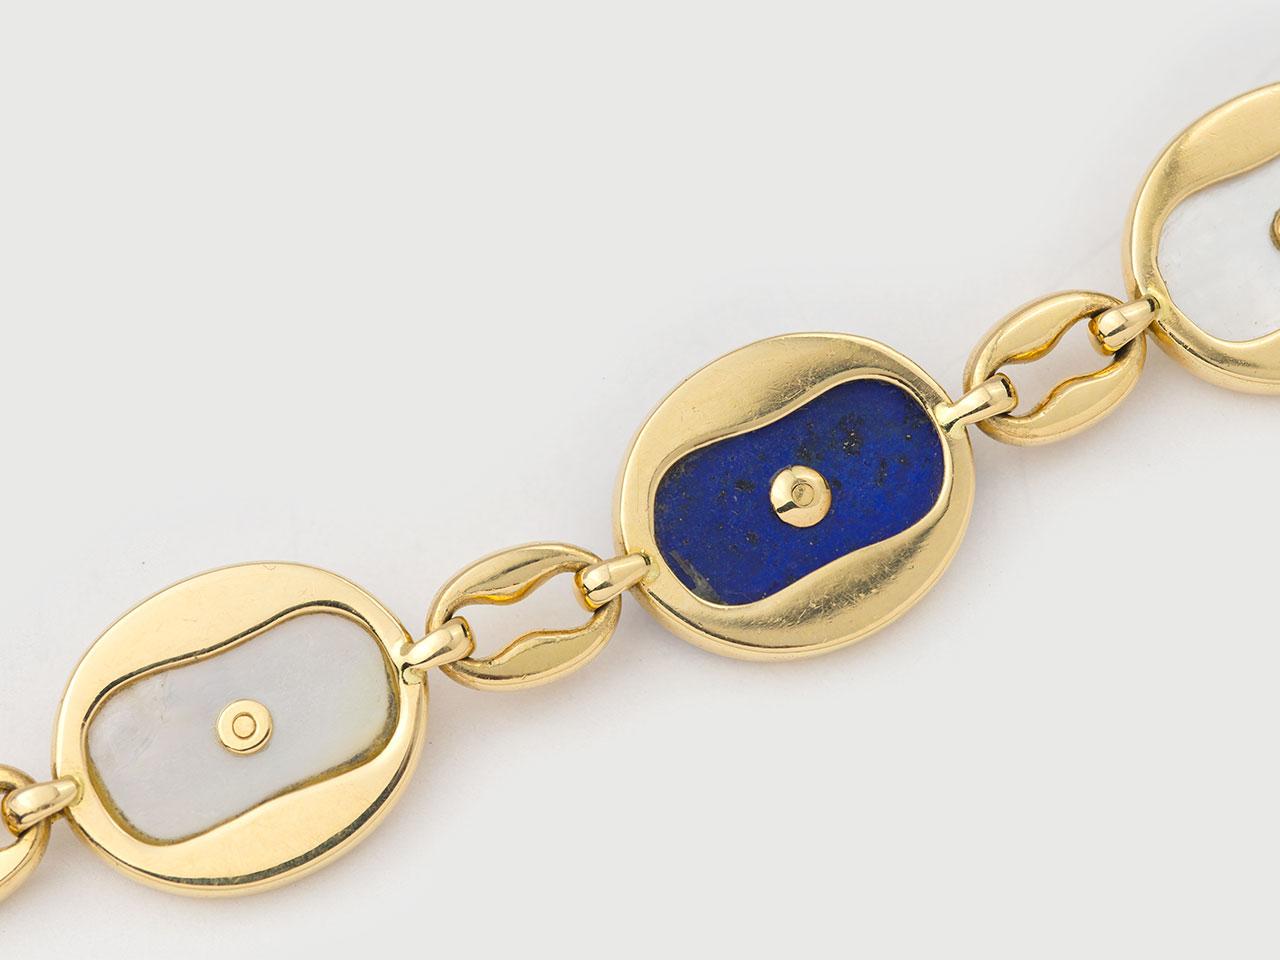 18k gold bracelet of mother of pearl and Lapis , centering a gold sun motif. CARITER PARIS 49429. 7-5/8 inches in length.